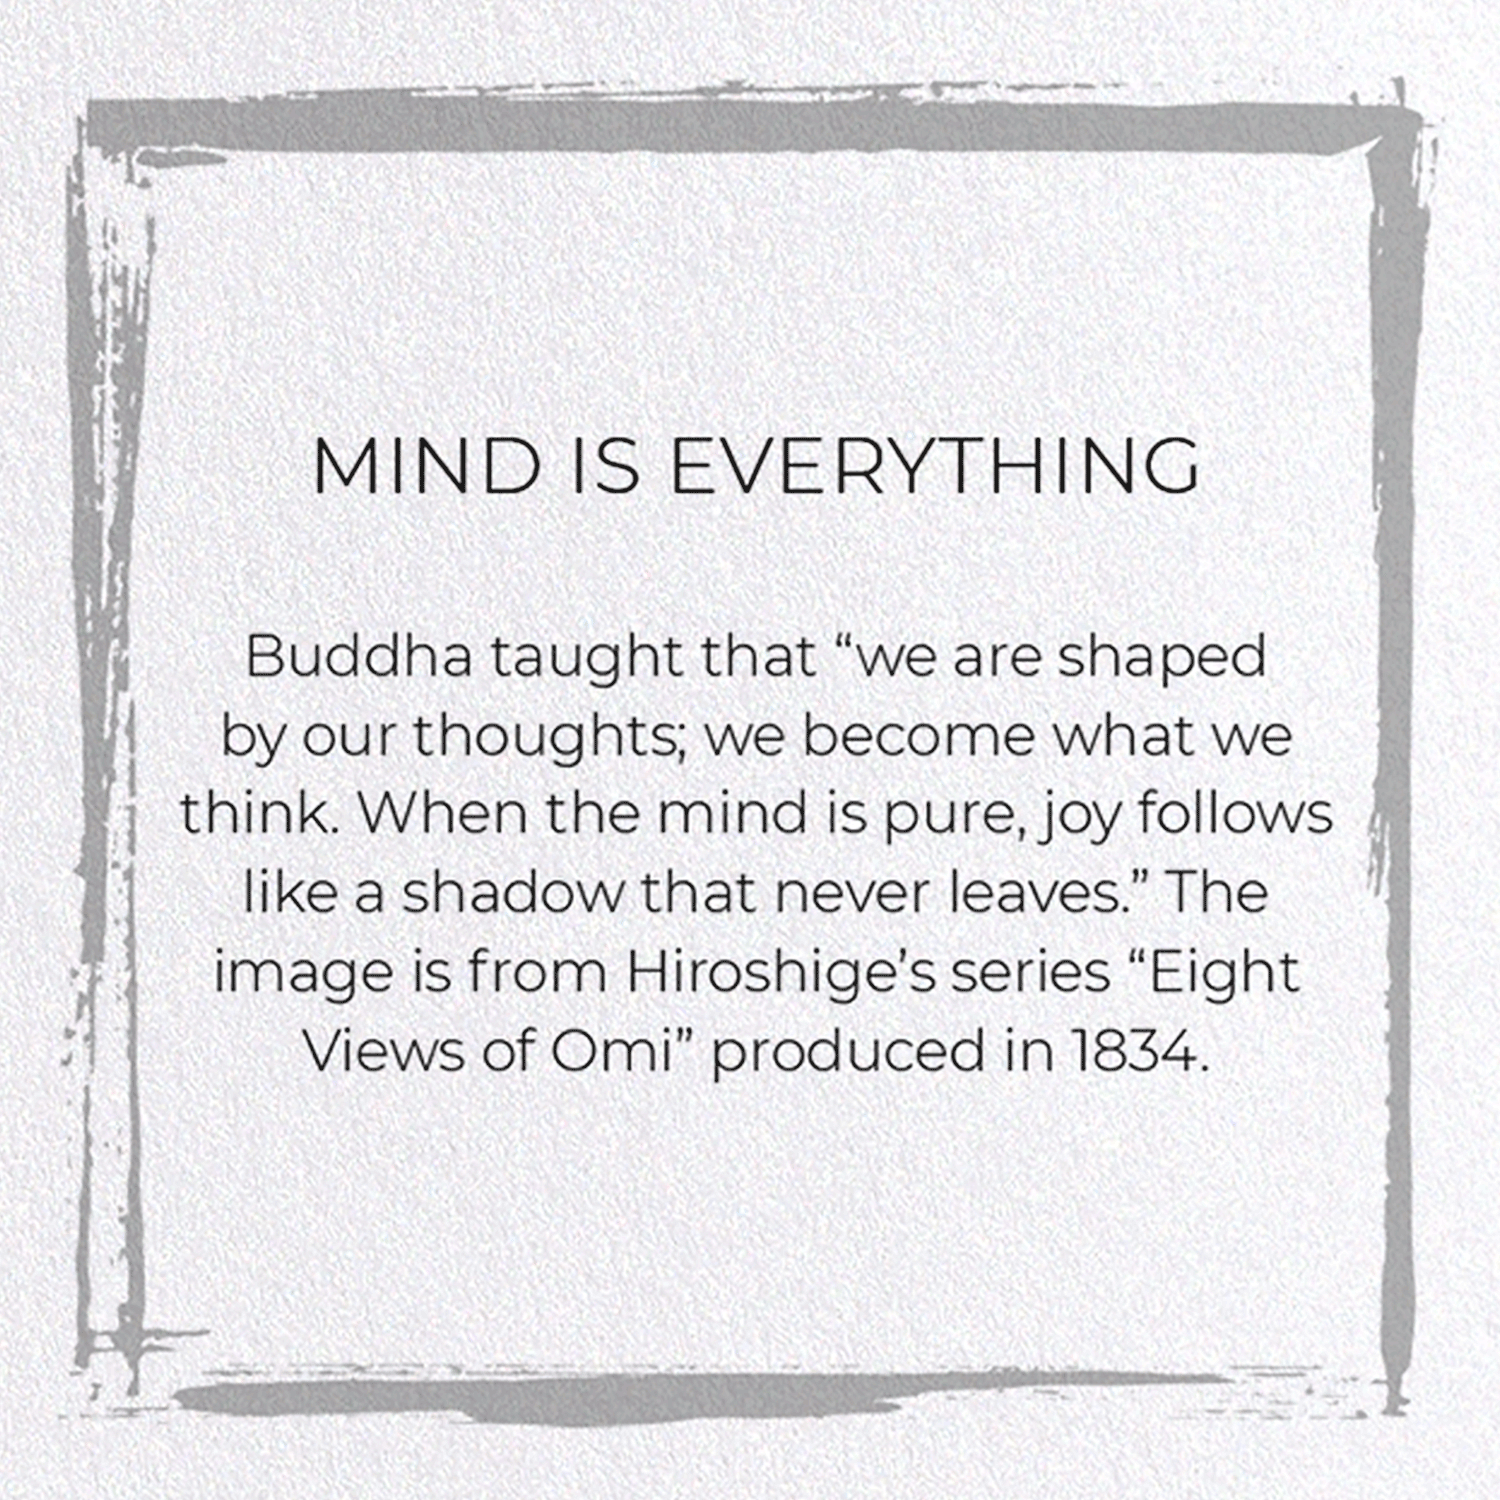 MIND IS EVERYTHING